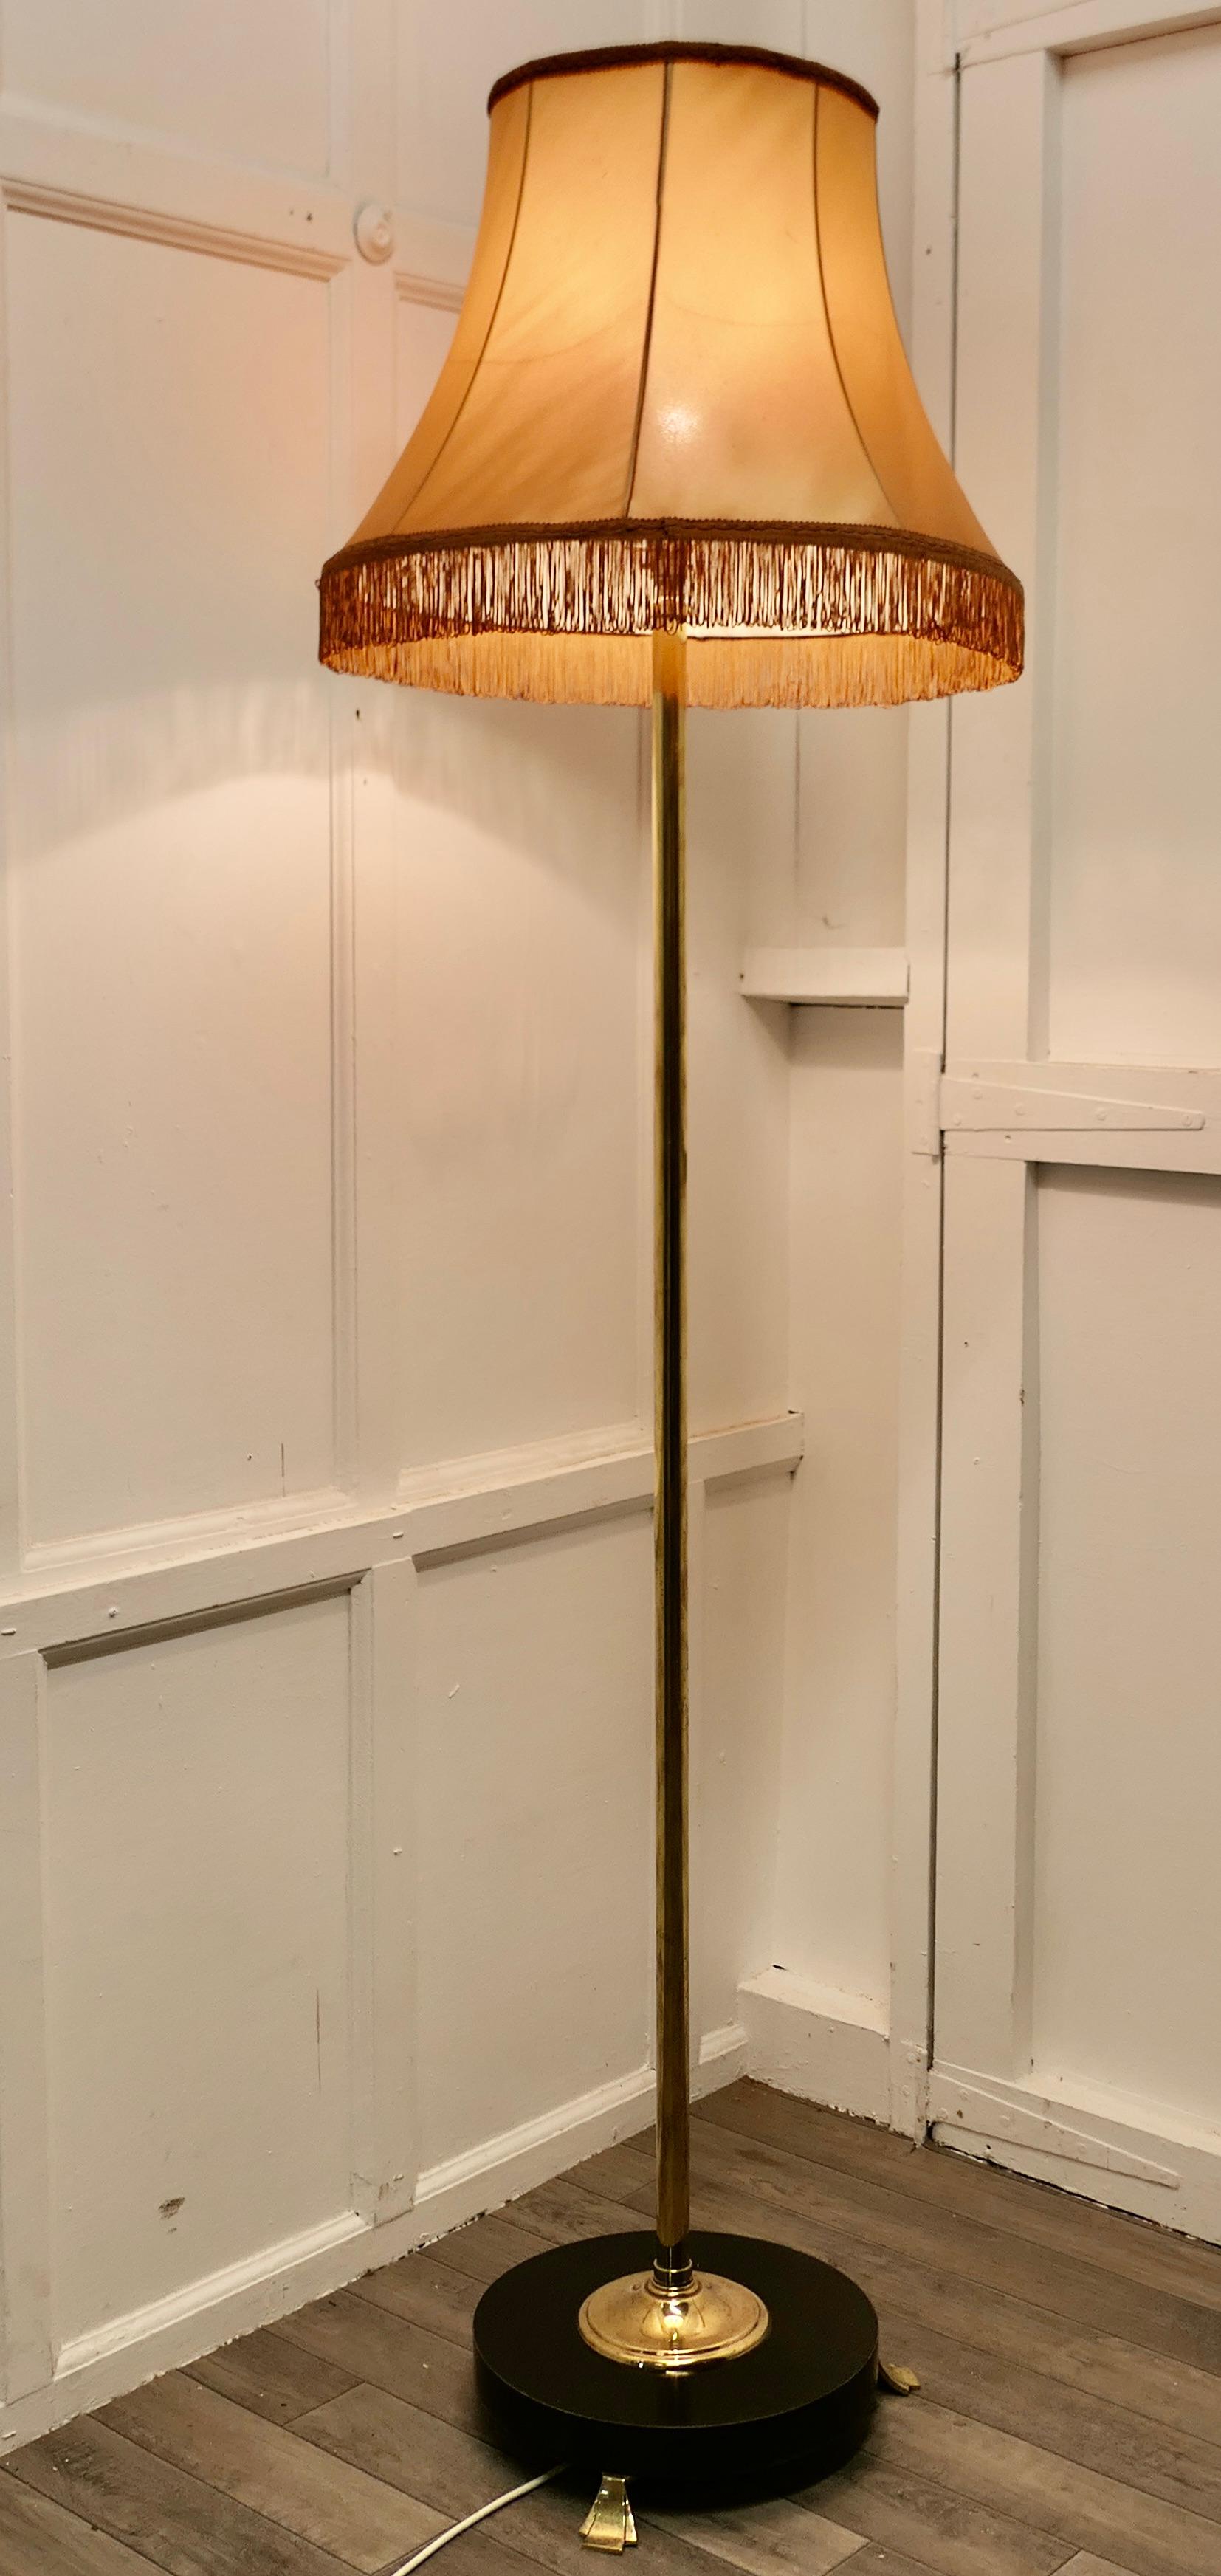 Art Deco Odeon style black and brass standard or floor lamp

This is a very stylish piece, the base of the lamp is a thick ebonised wooden round set on brass feet supporting a tall brass column 
The lamp is in good condition, working and comes